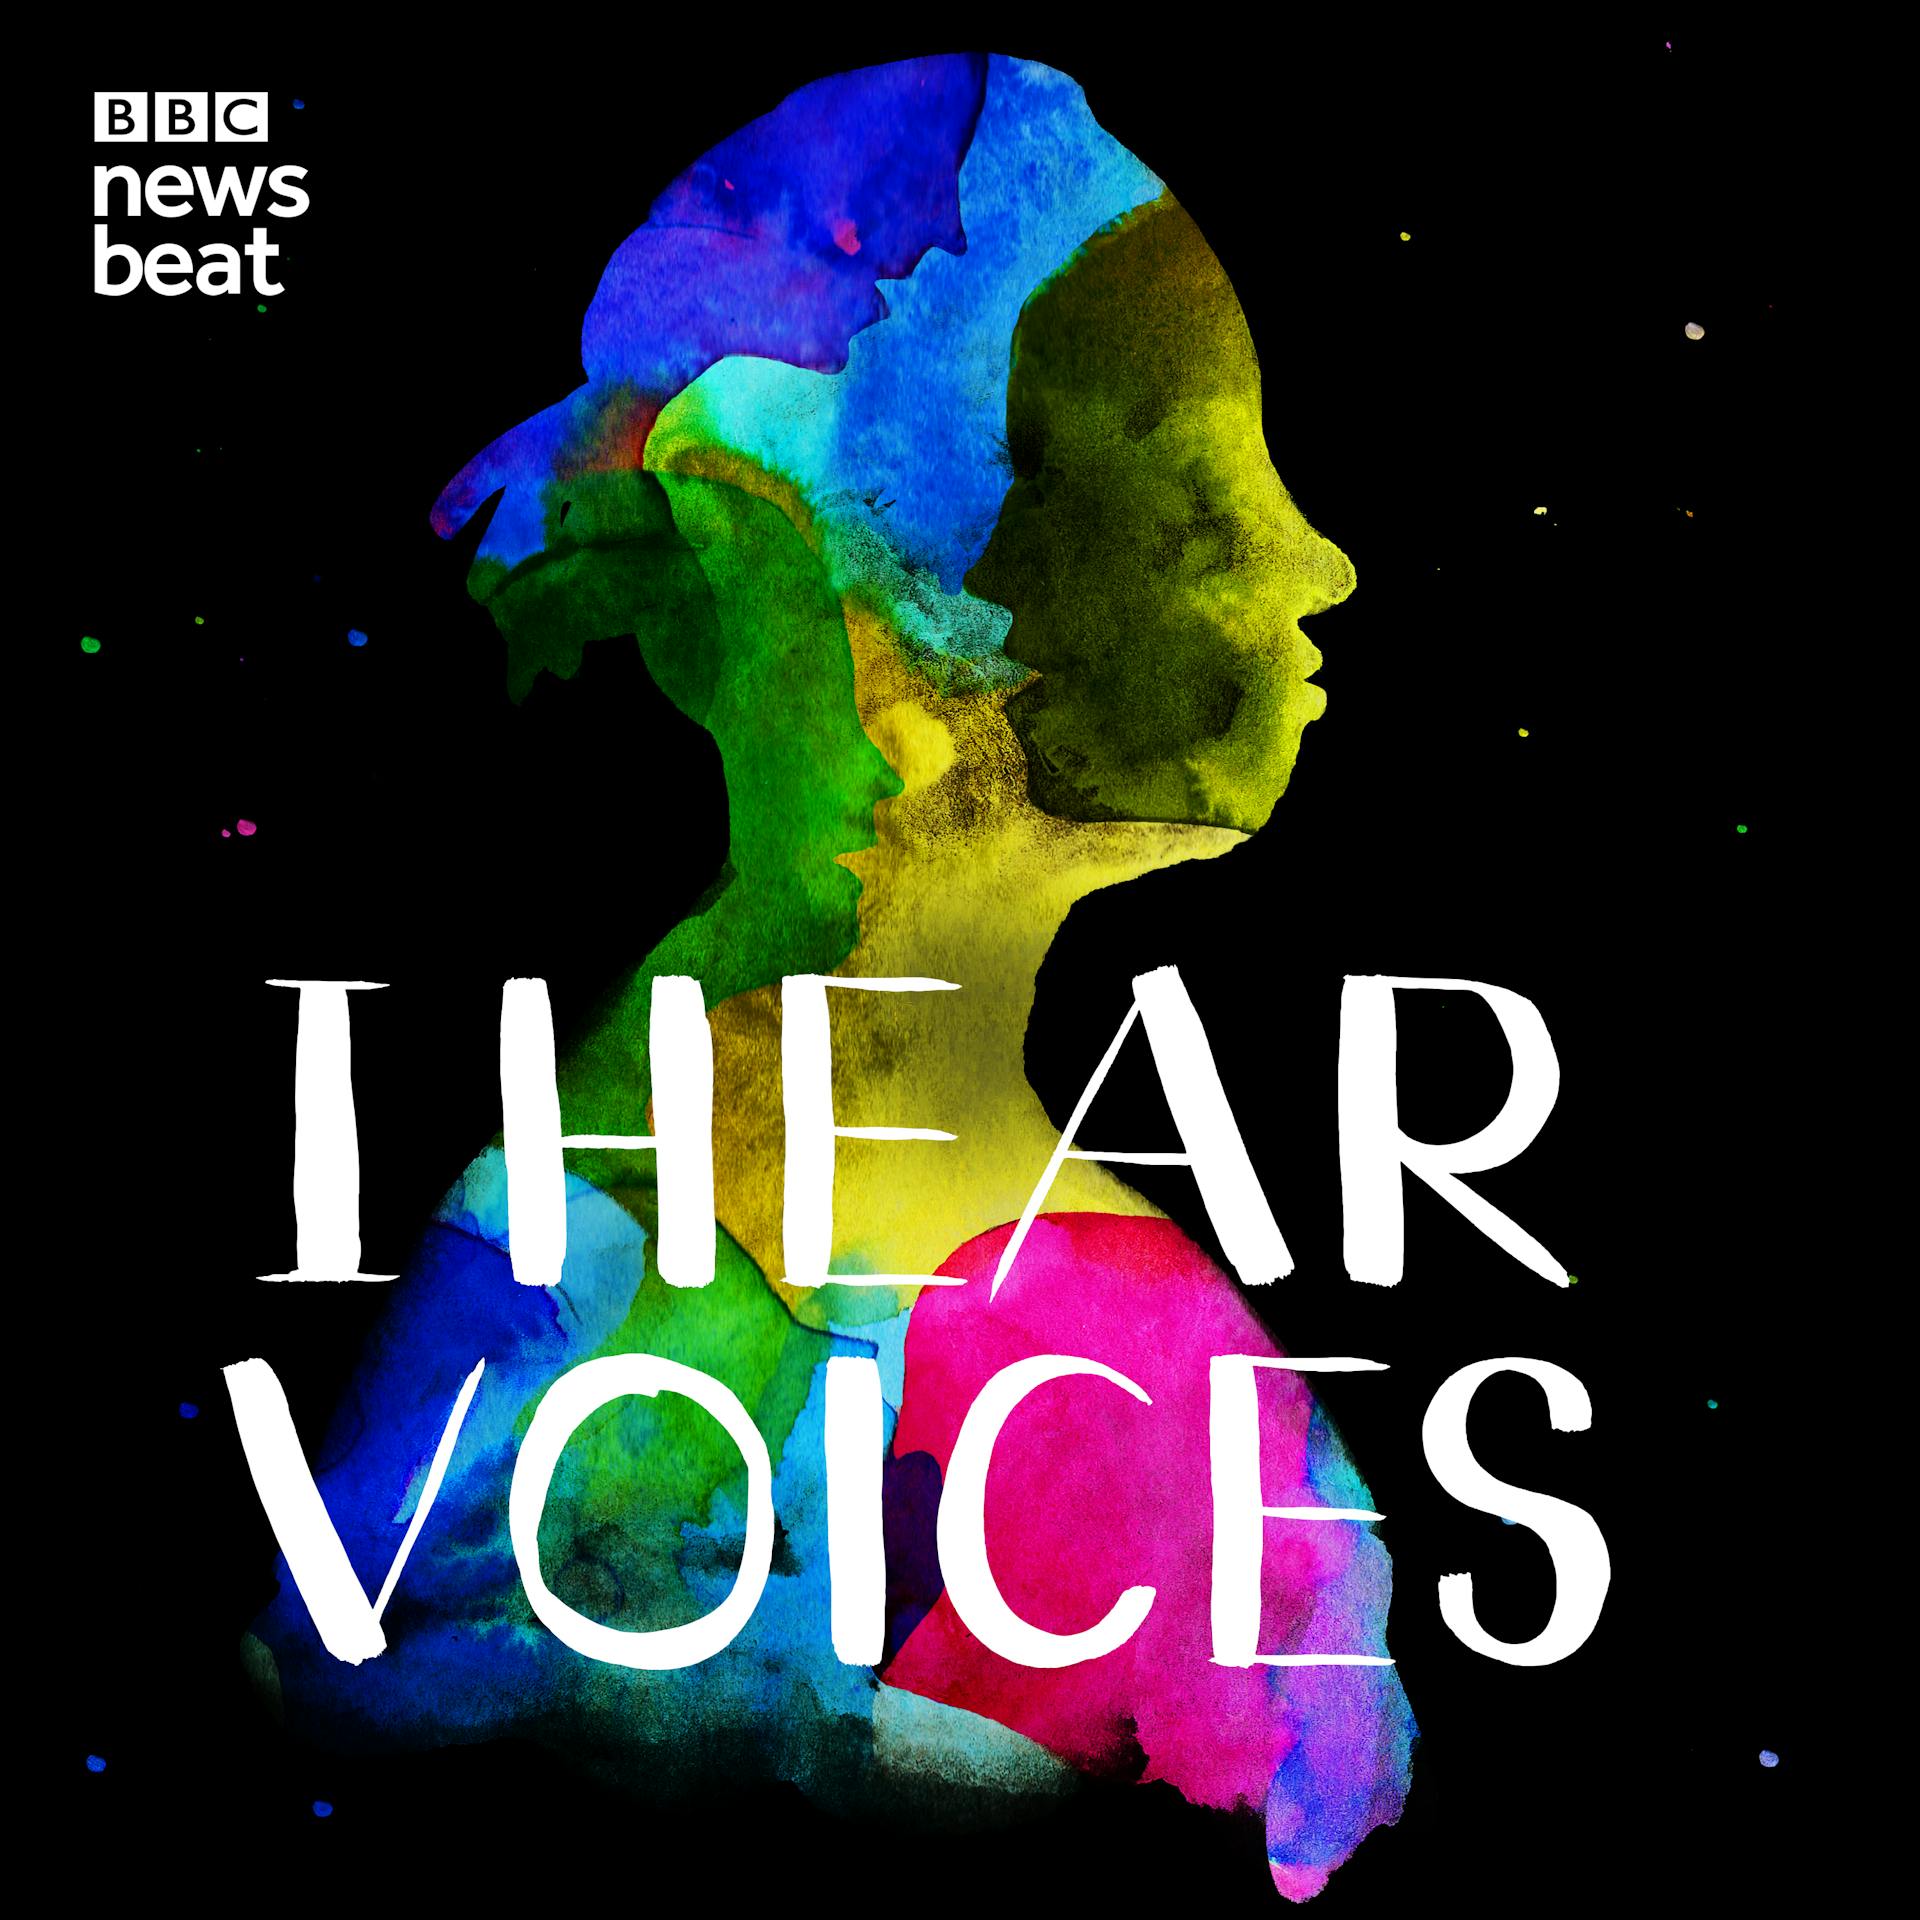 'I Hear Voices', Profiling Woman's Journey With Schizophrenia, Shortlisted for Award